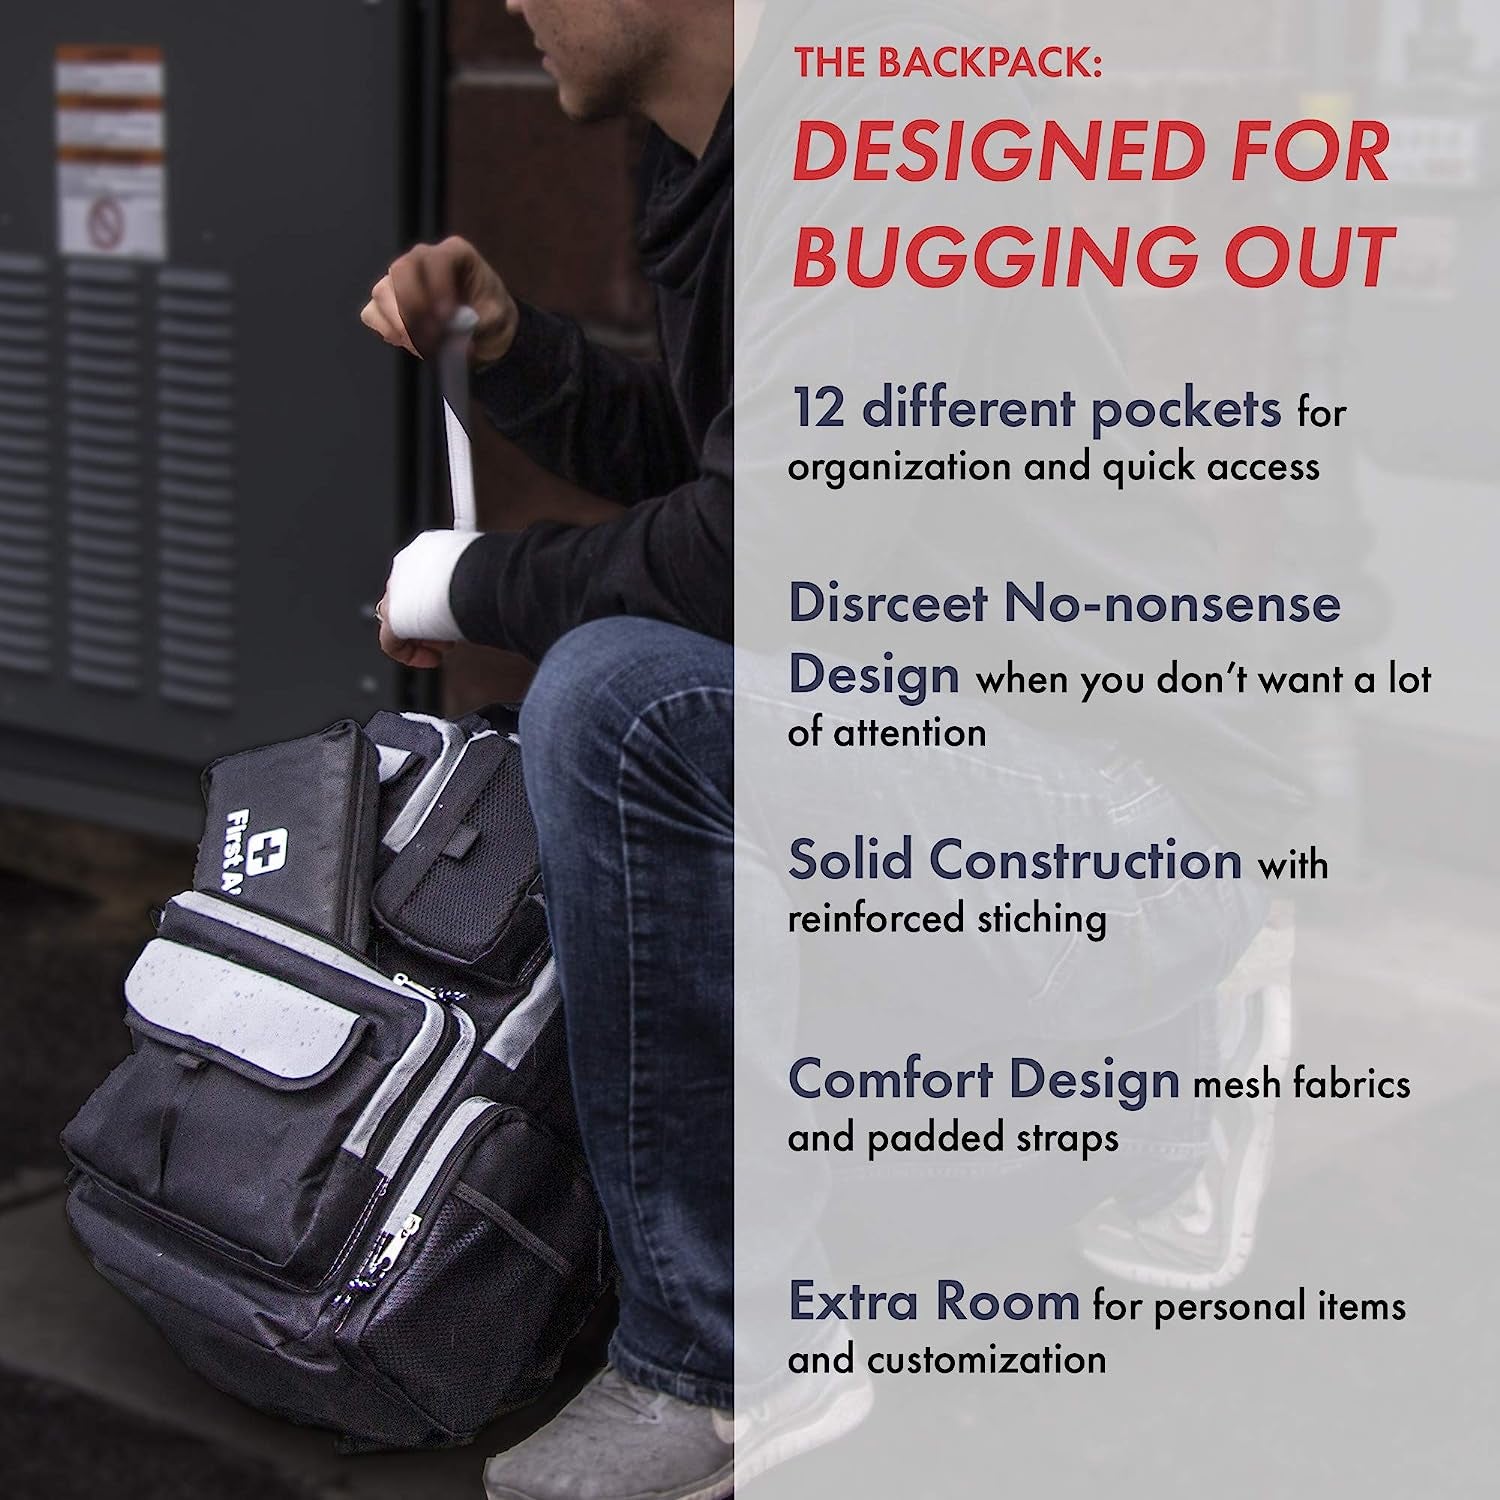 Urban Survival Bug-Out Bag/Go Bag and Disaster Survival Supplies for up to 6 People